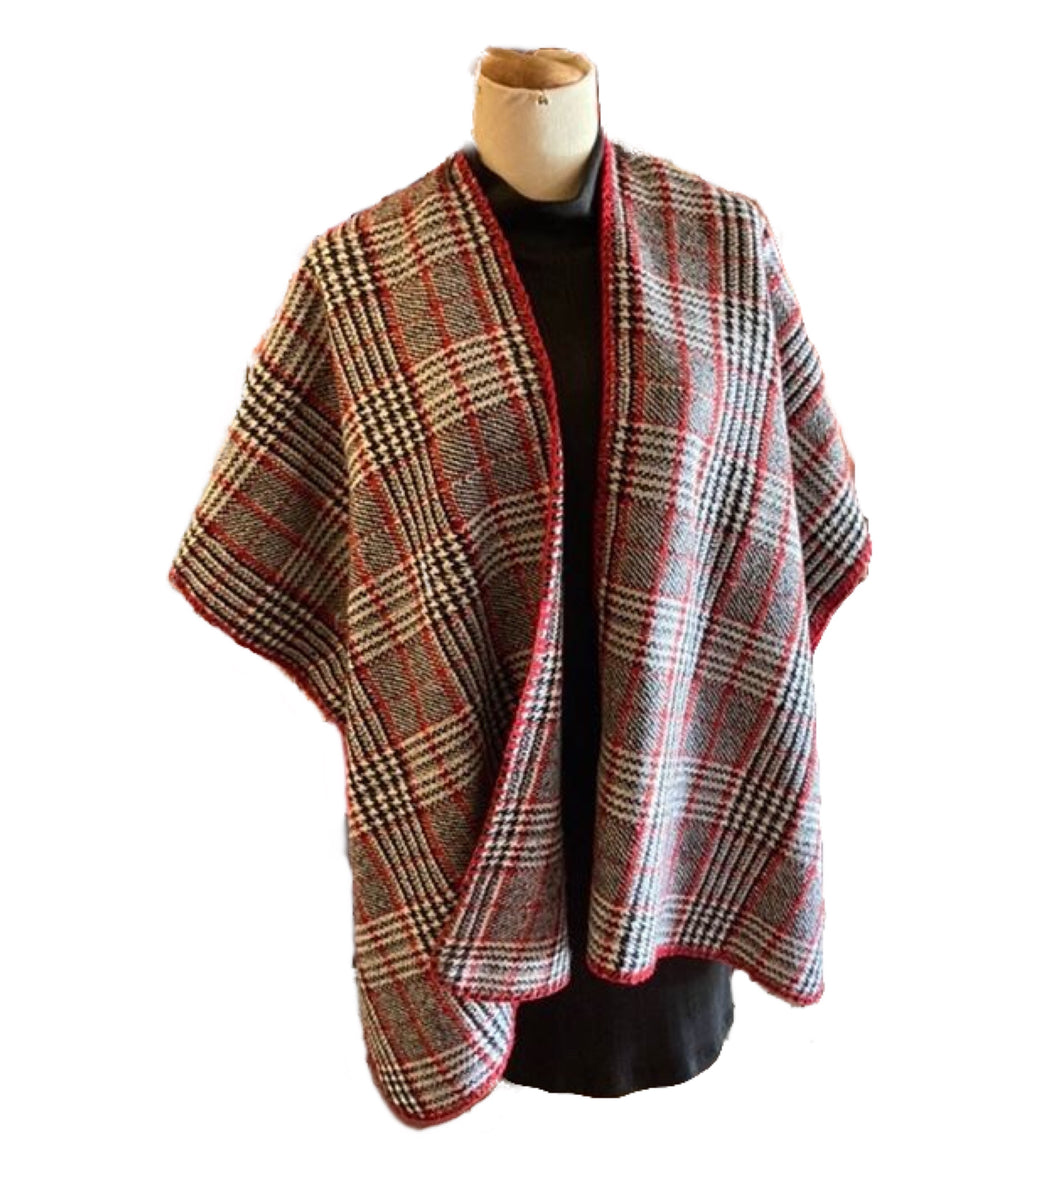 Red, Black, and White Plaid Print Kimono Cardigan with Stitched Edges